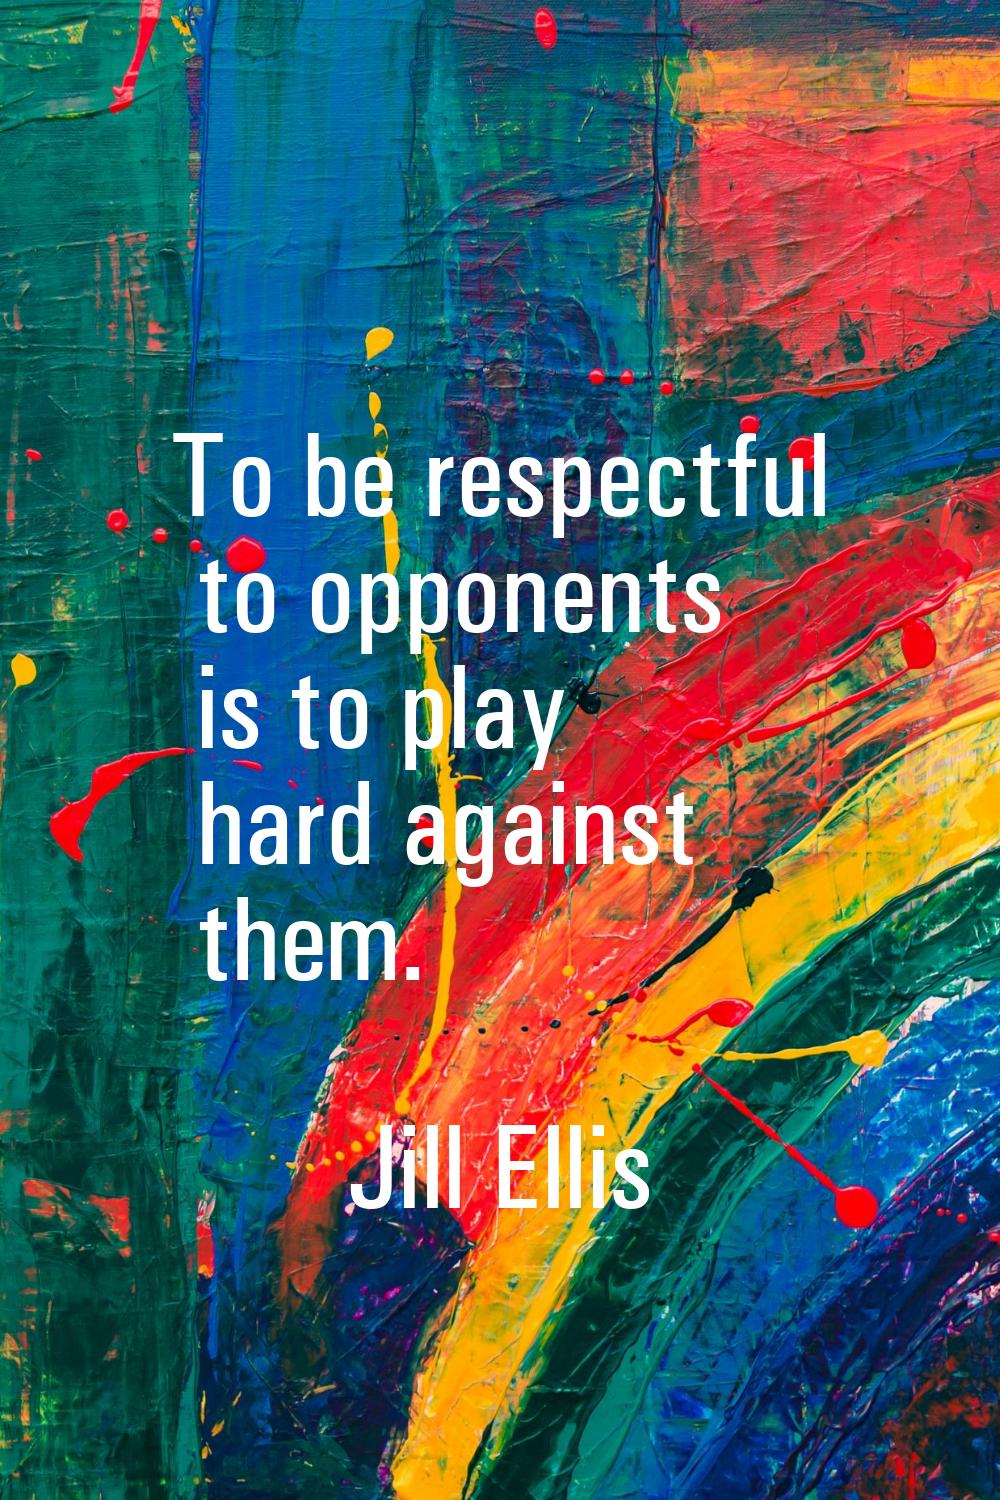 To be respectful to opponents is to play hard against them.